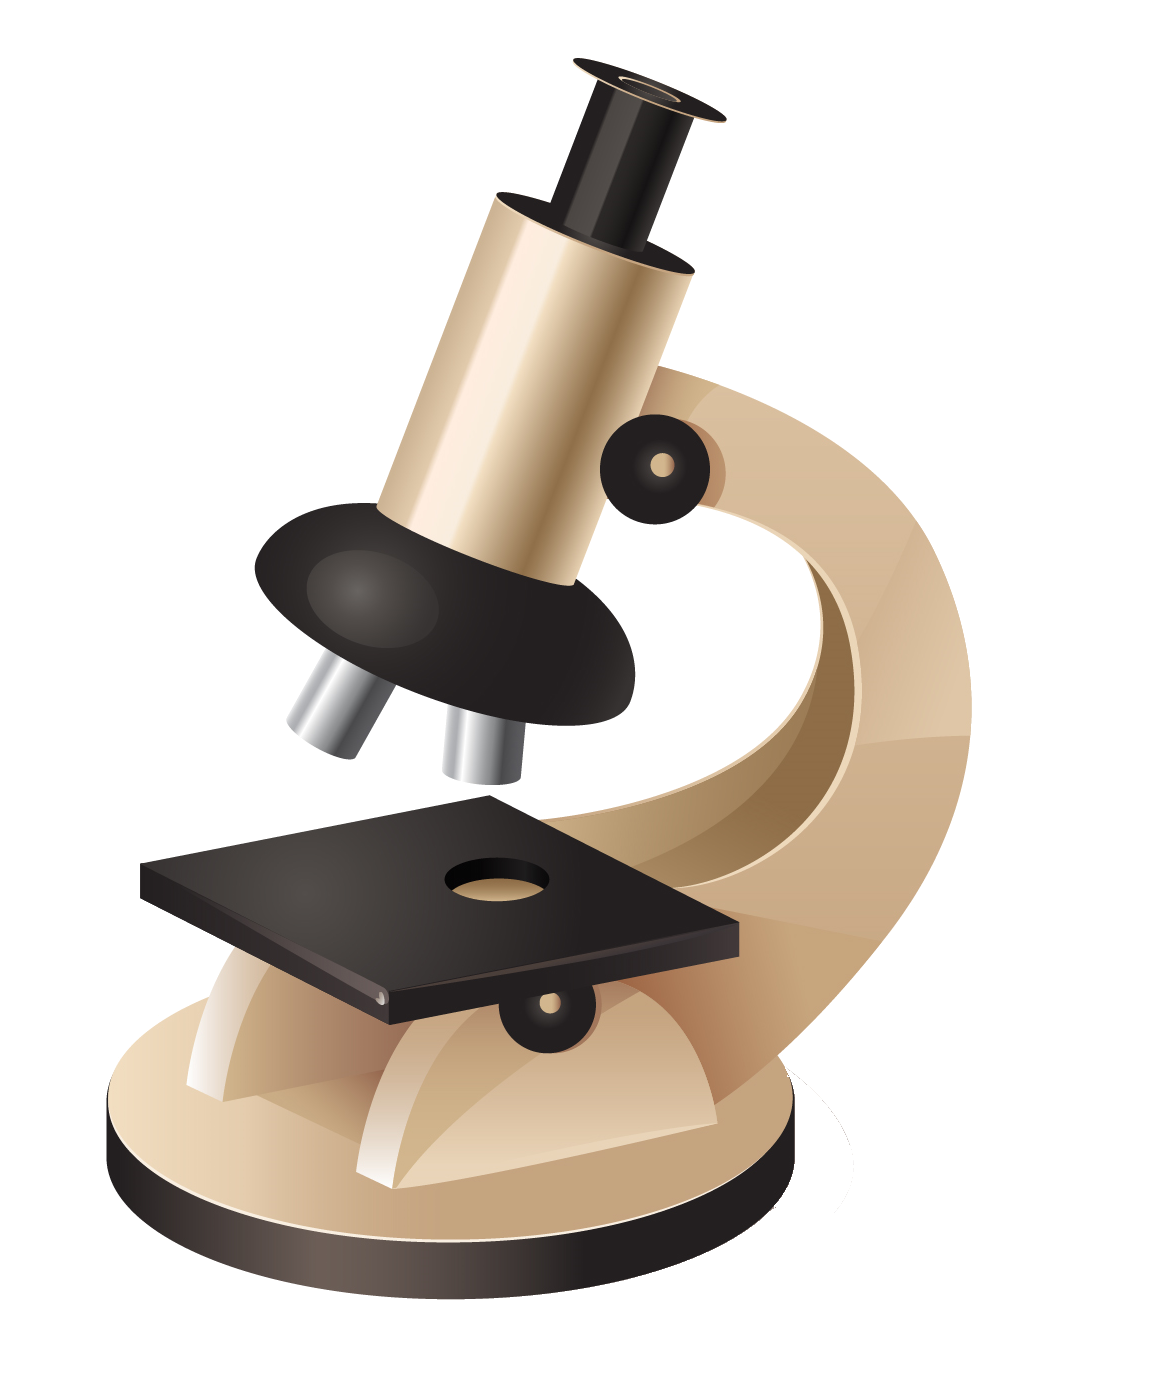 Lab Microscope PNG Transparent Image